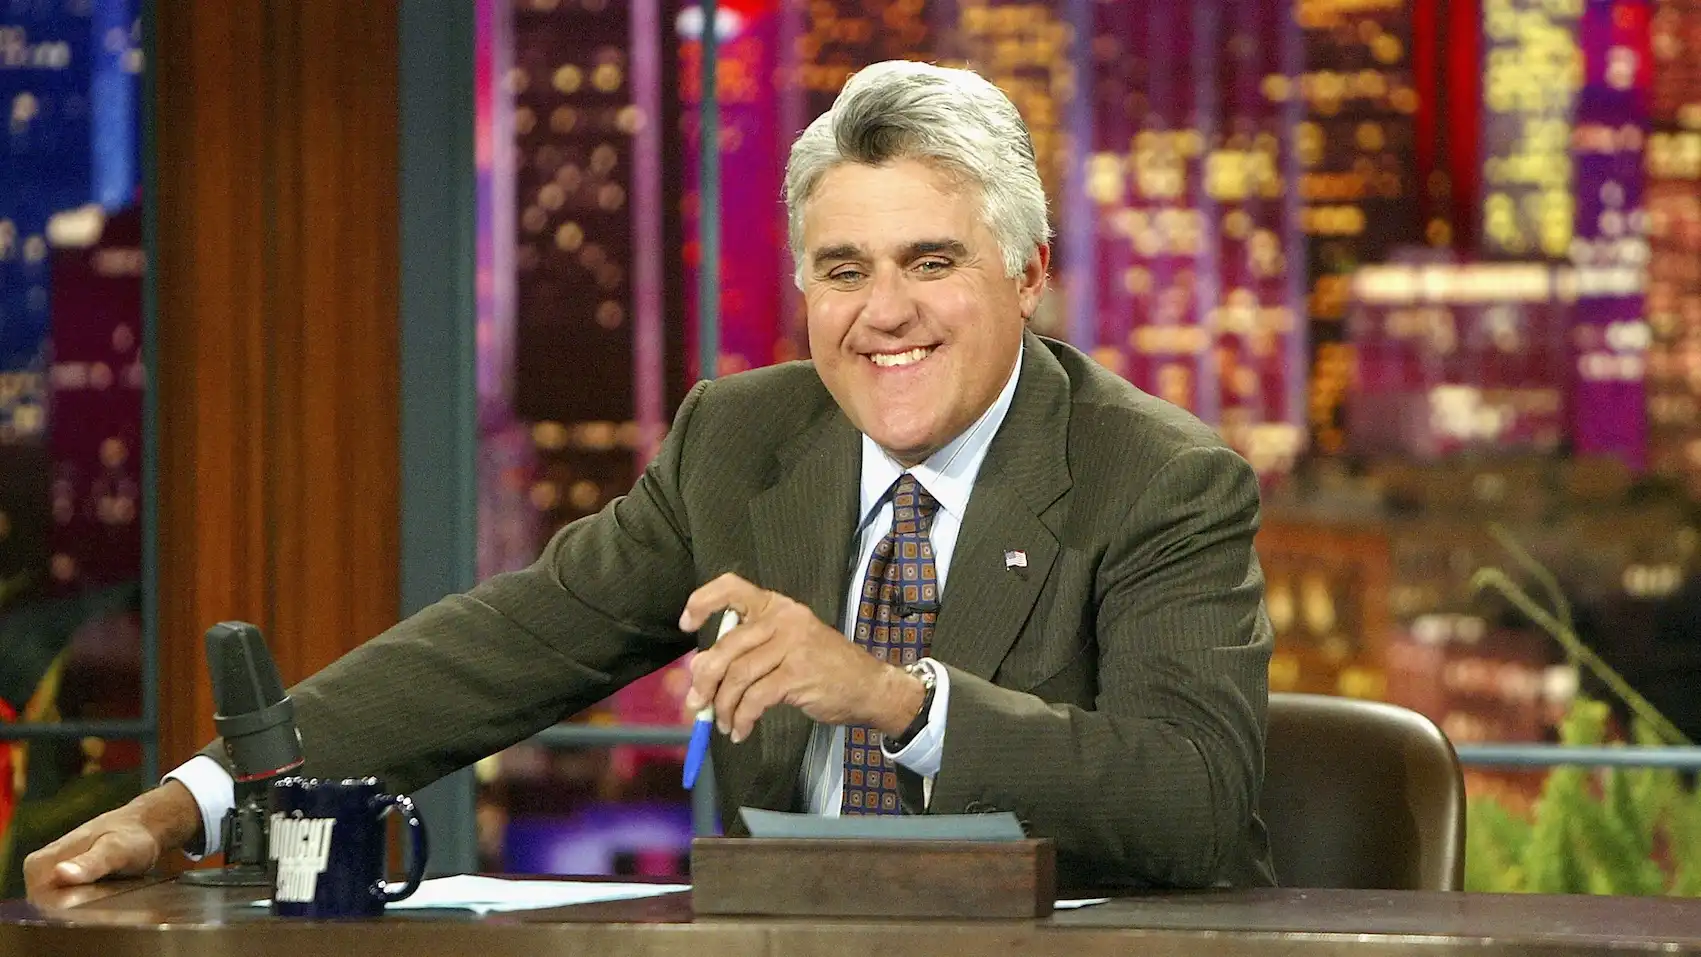 Jay Leno files conservatorship wife struggles with dementia